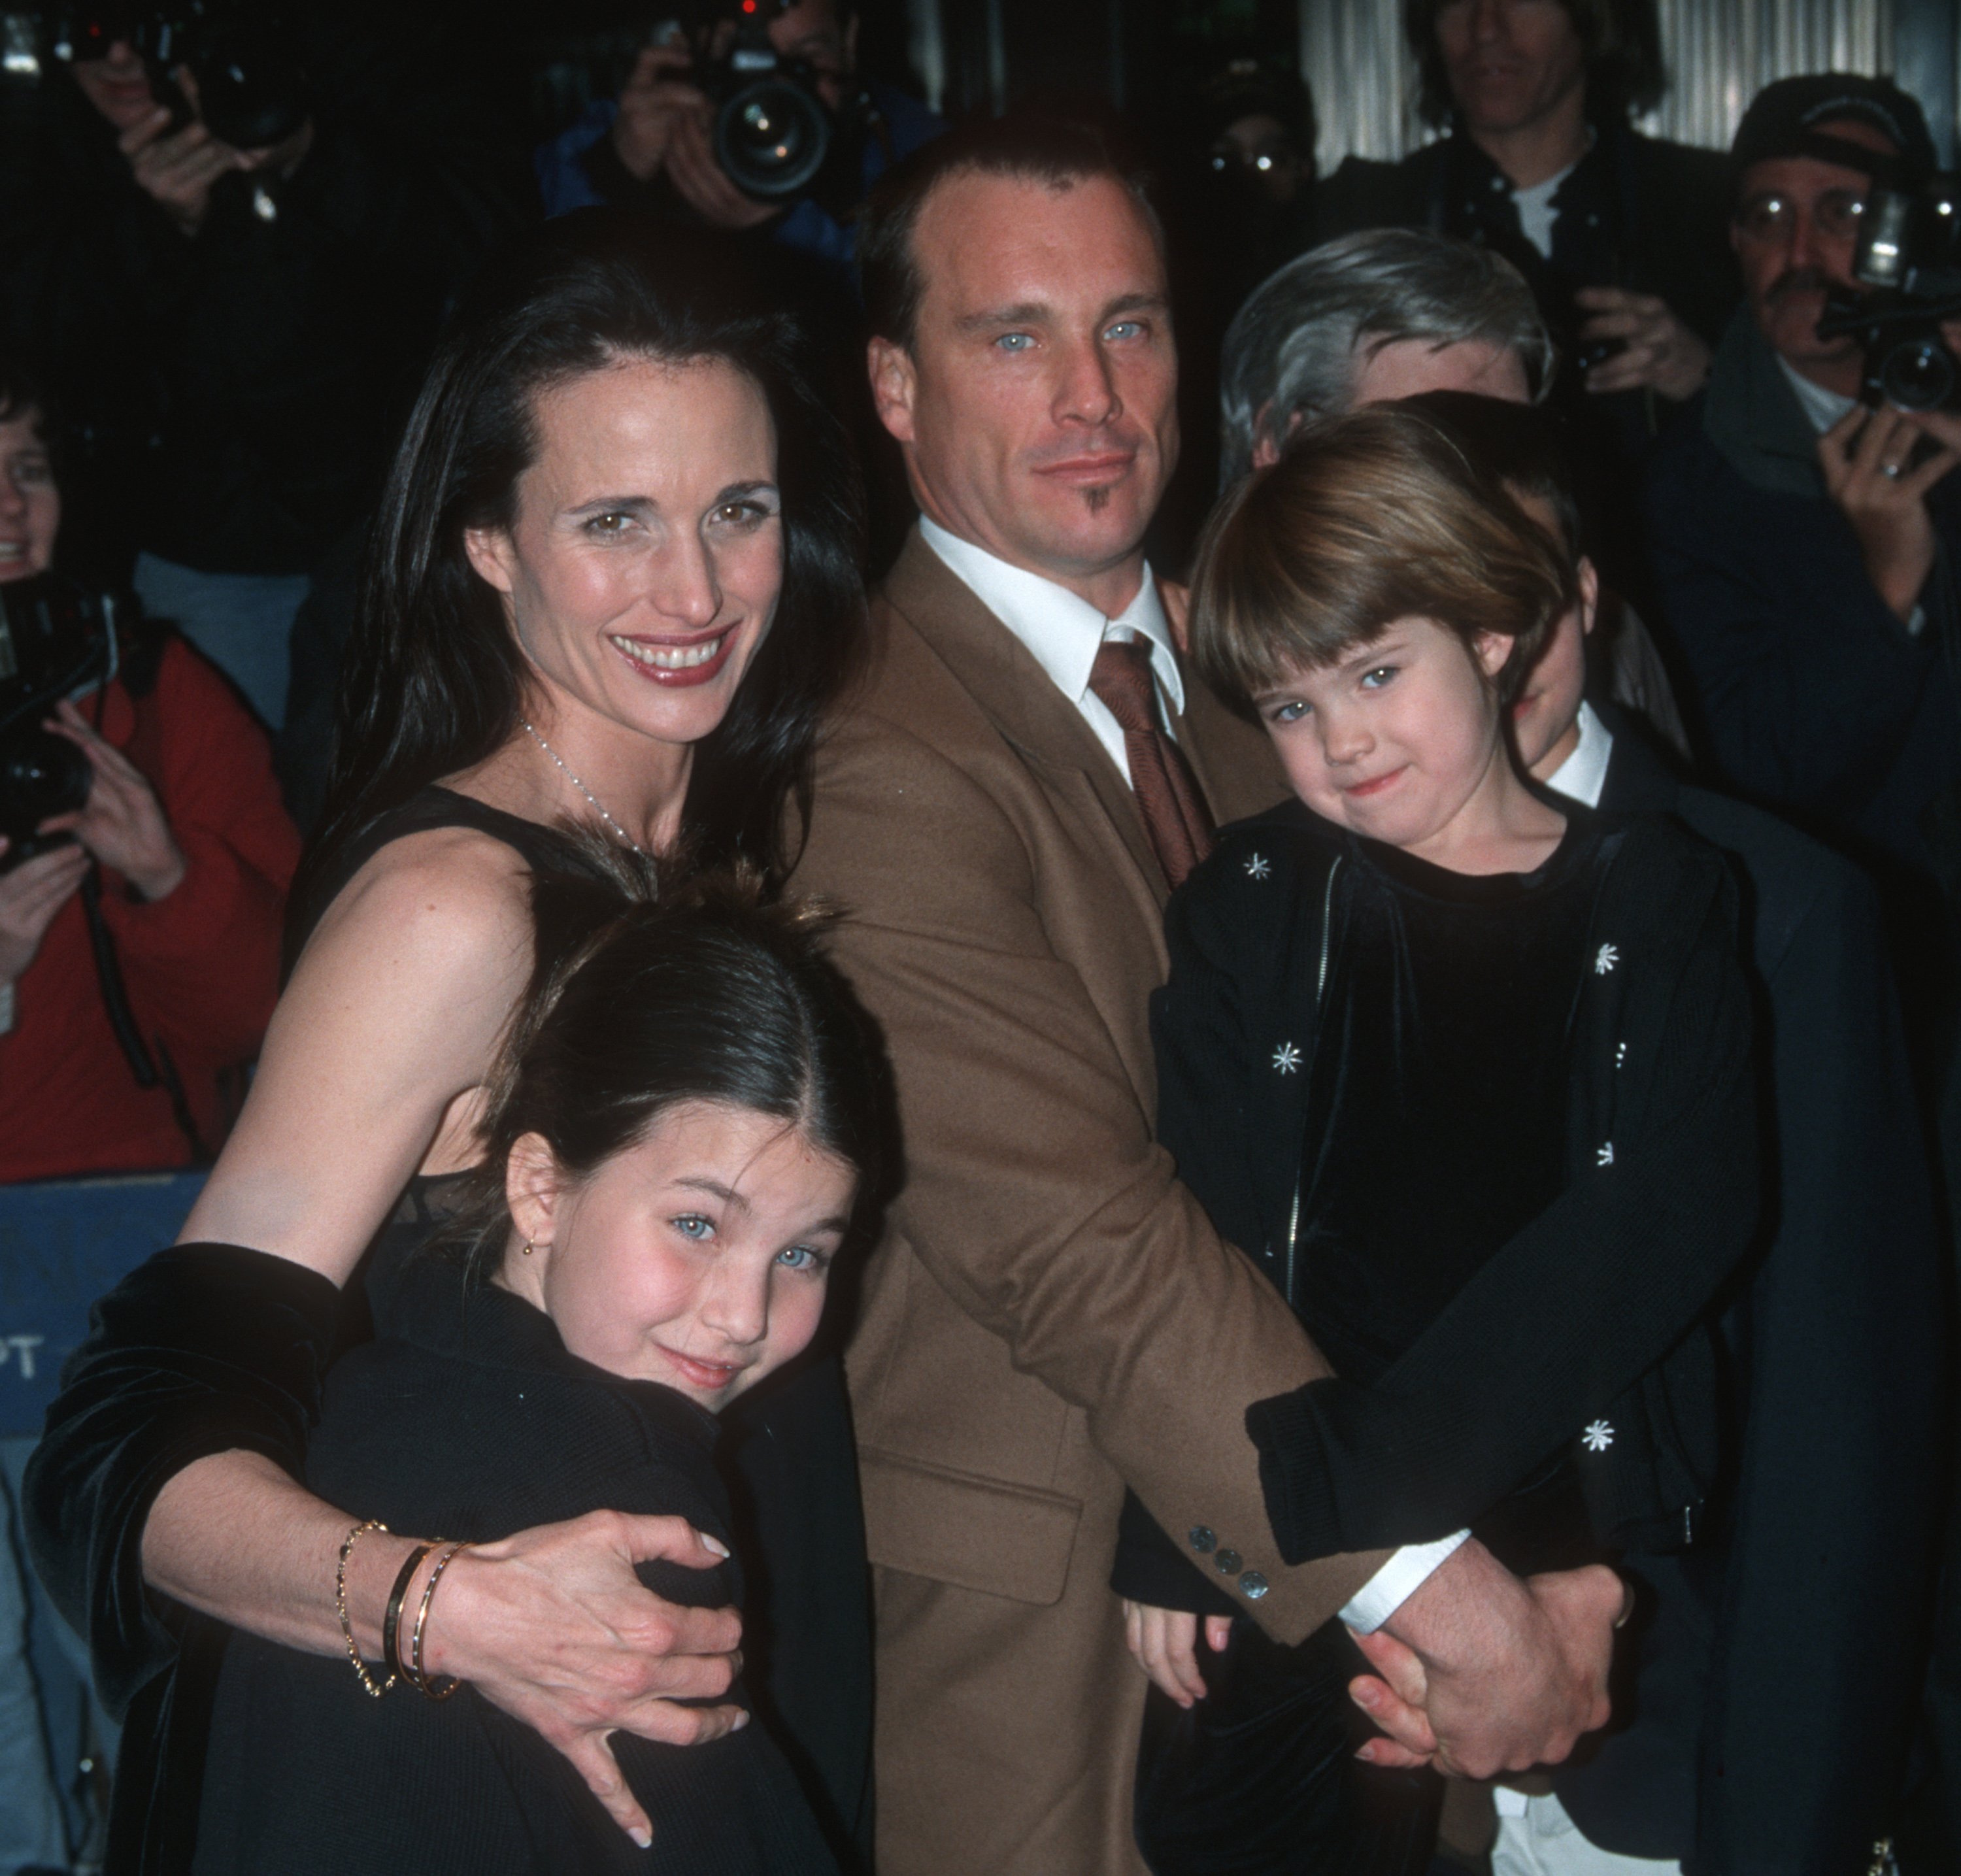 Andie MacDowell Didn't See Her Classmate in Decades Later Her Sister